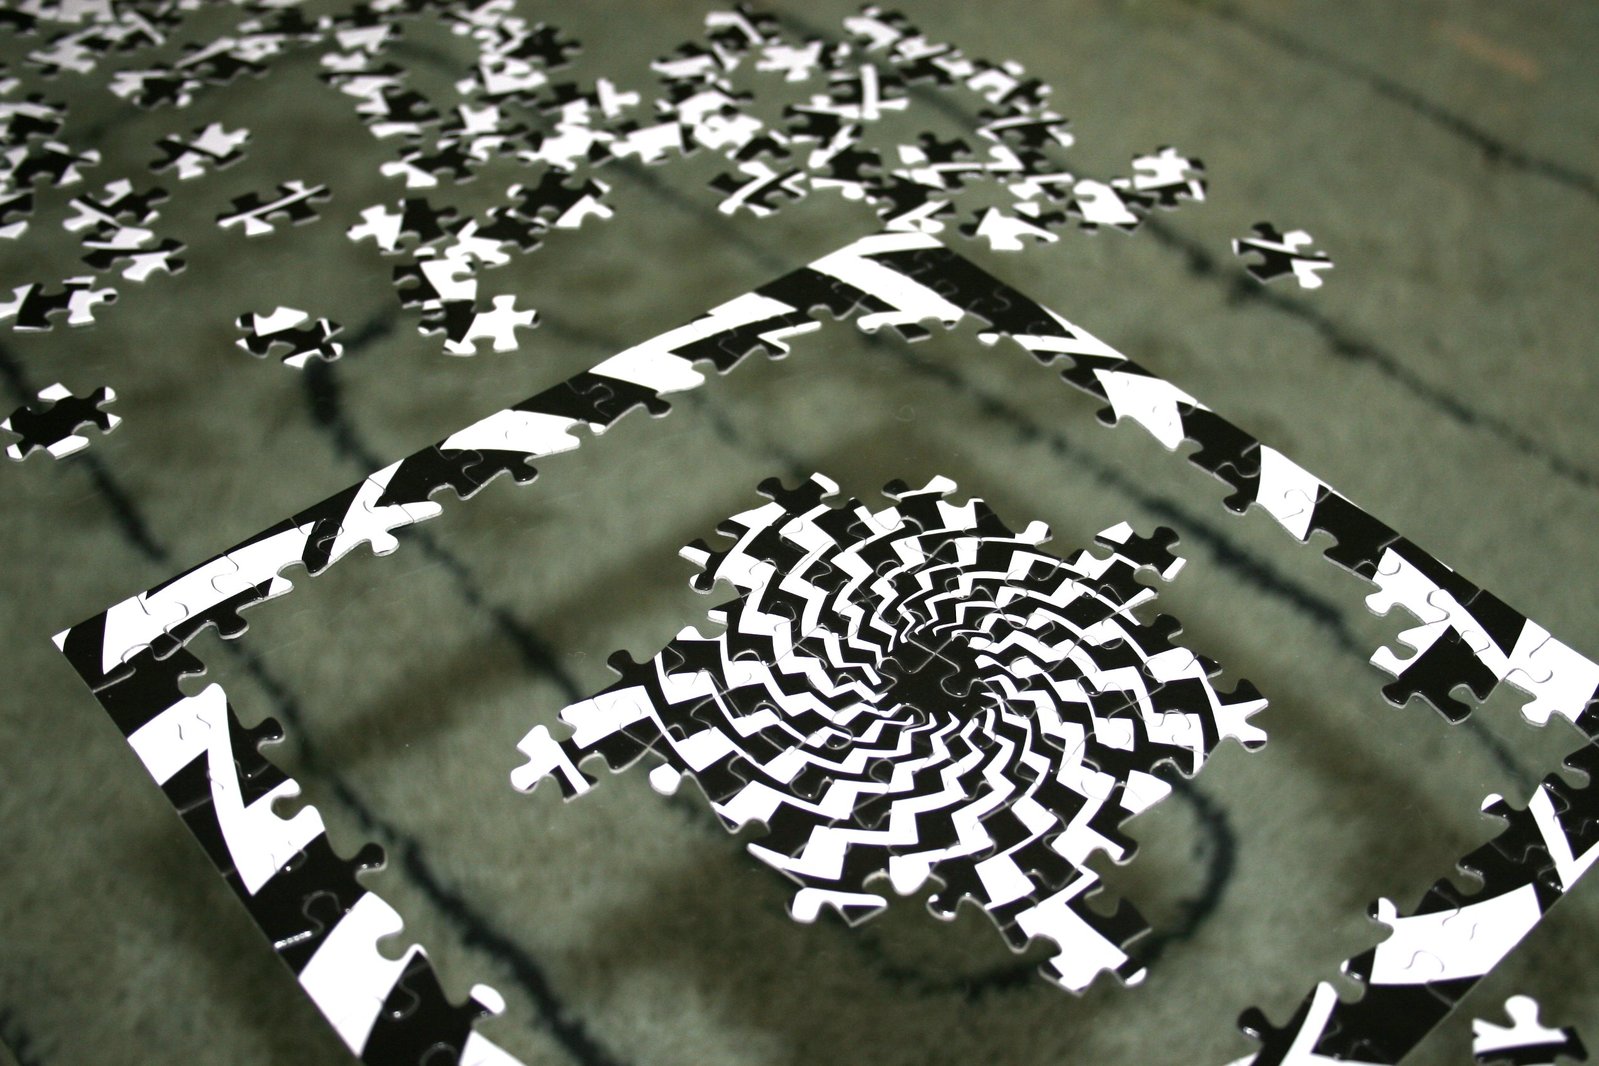 the rug is black and white with black squares